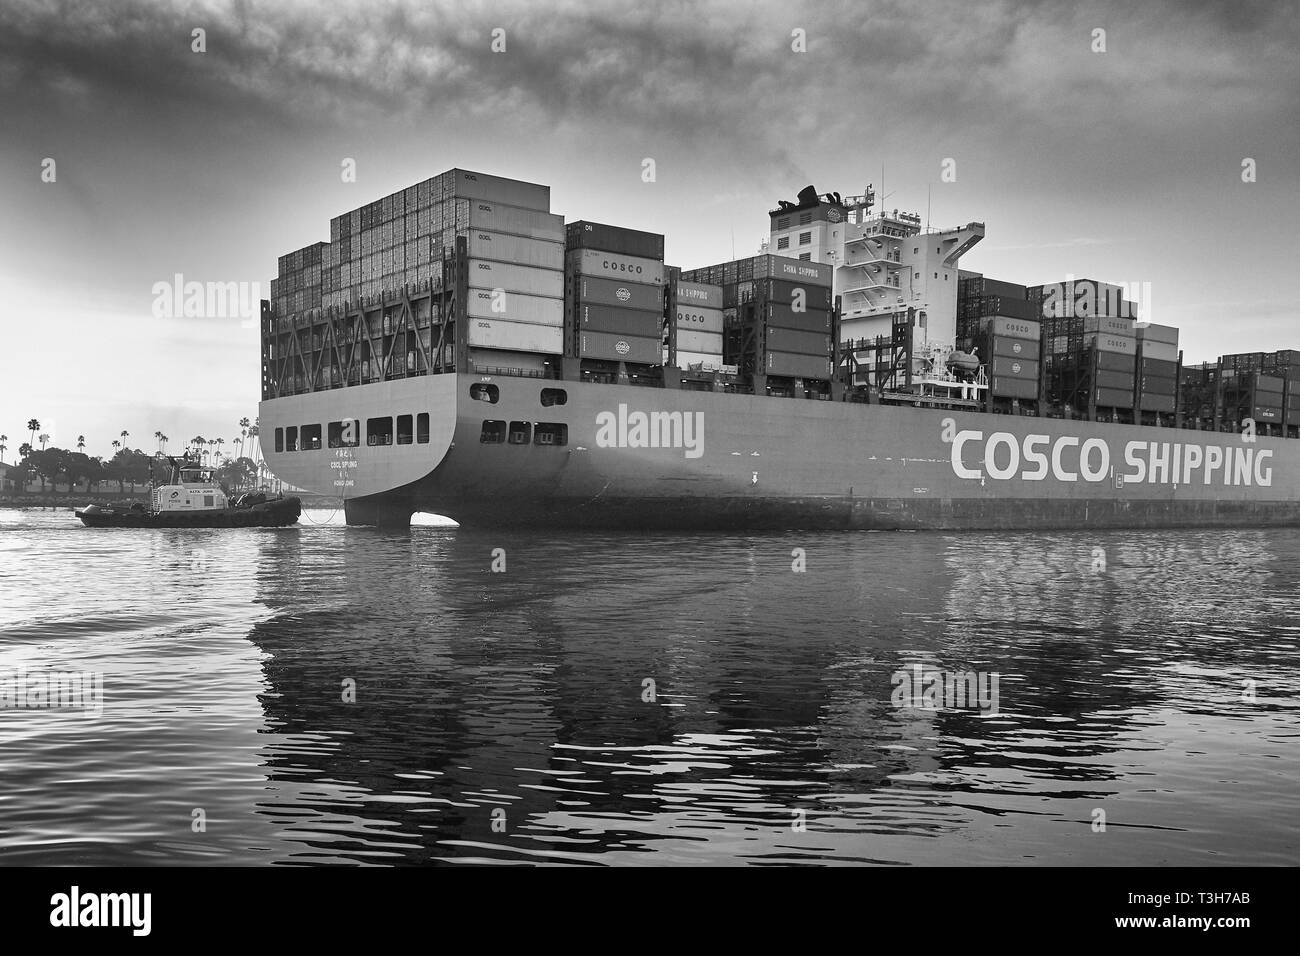 Black And White Image Of The COSCO SHIPPING SPRING Departing The Port of Los Angeles, California, USA. Stock Photo